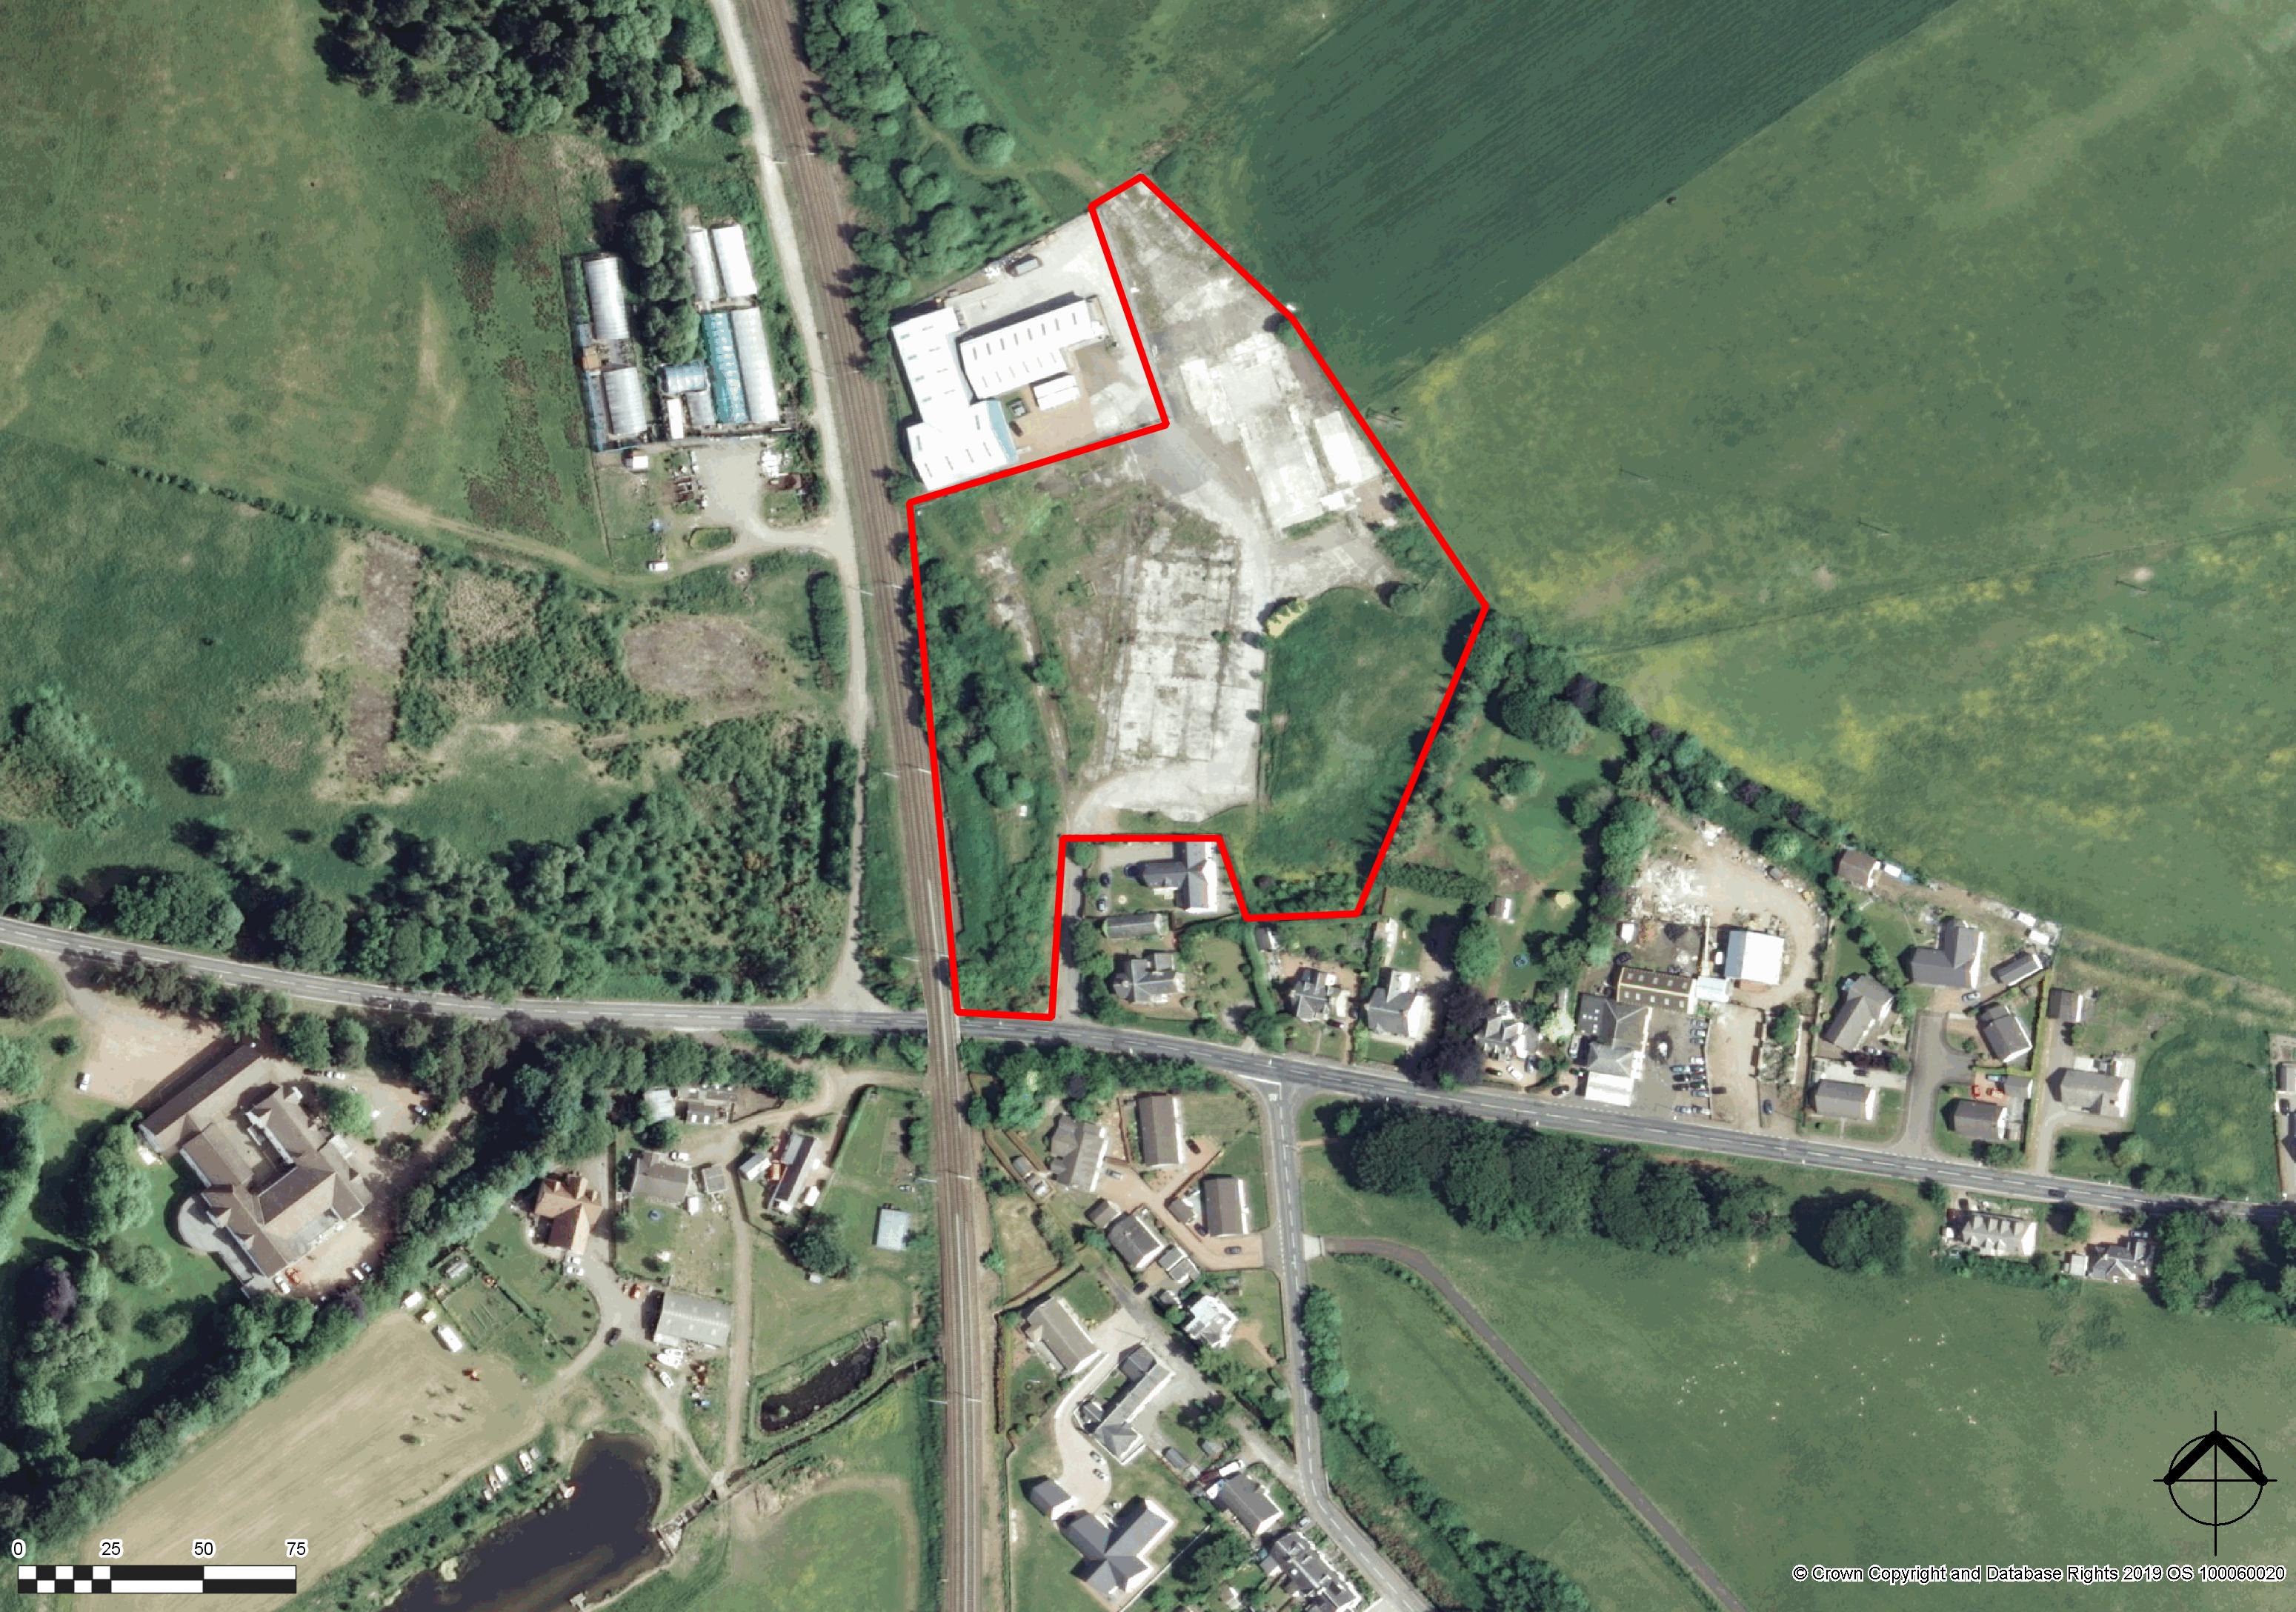 Large plot of land for residential development in Symington up for sale at auction